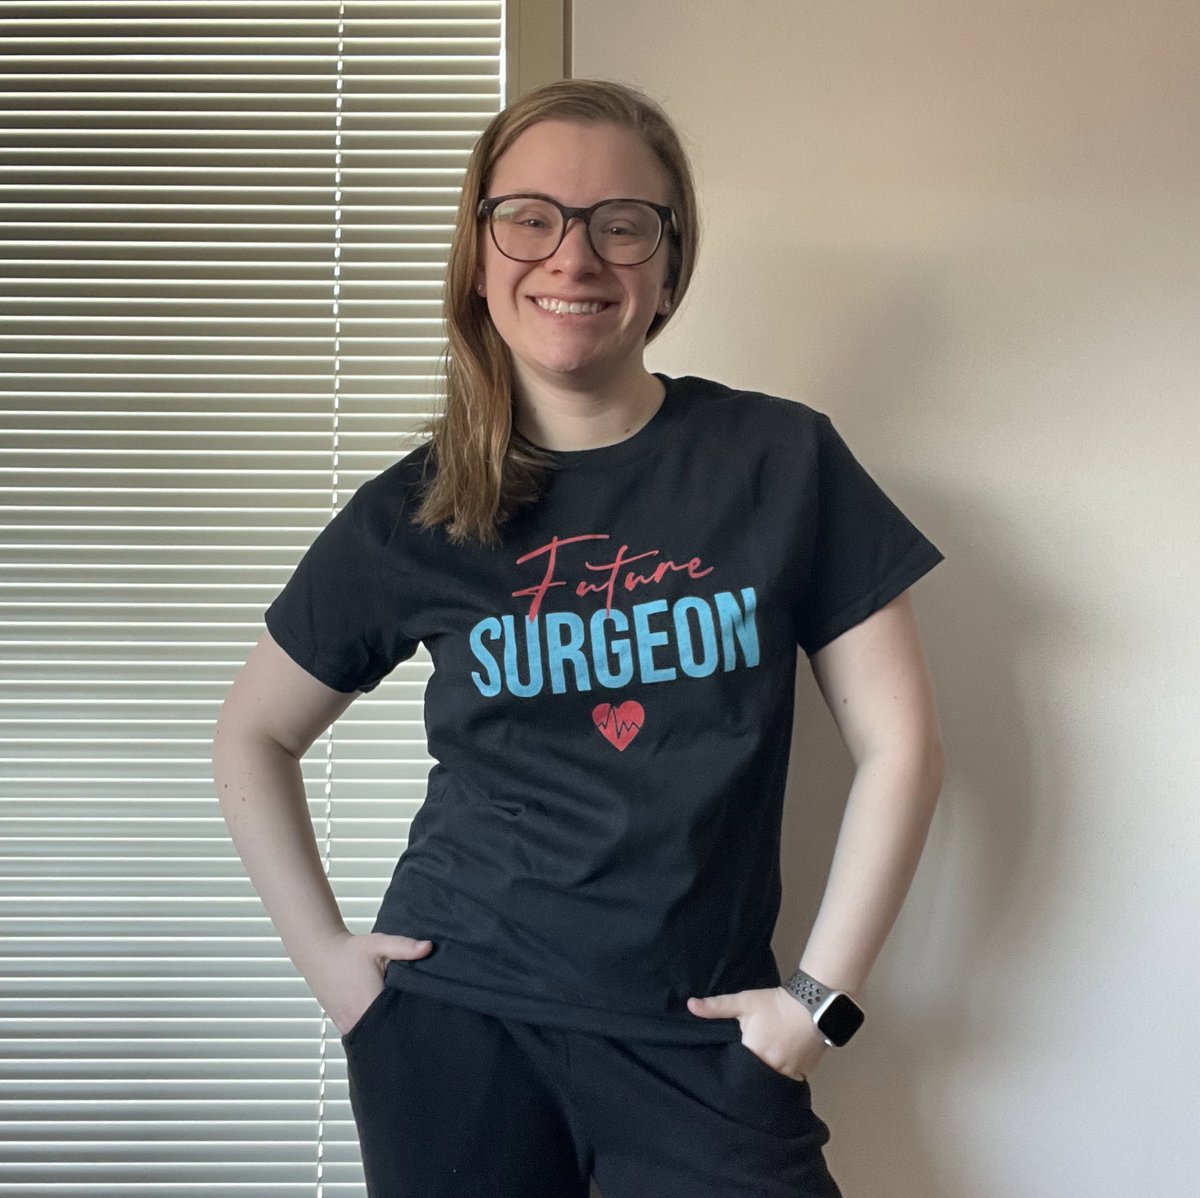 Hi #MedTwitter — big update! I am ecstatic to apply #GeneralSurgery in #match2024🔪 

I am interested in continuing to intersect #bioethics and #narrativemedicine with my career, as well as keeping my hobbies of skiing⛷️, food exploring (insta: medstudentmunchies) and hiking 🧗‍♀️